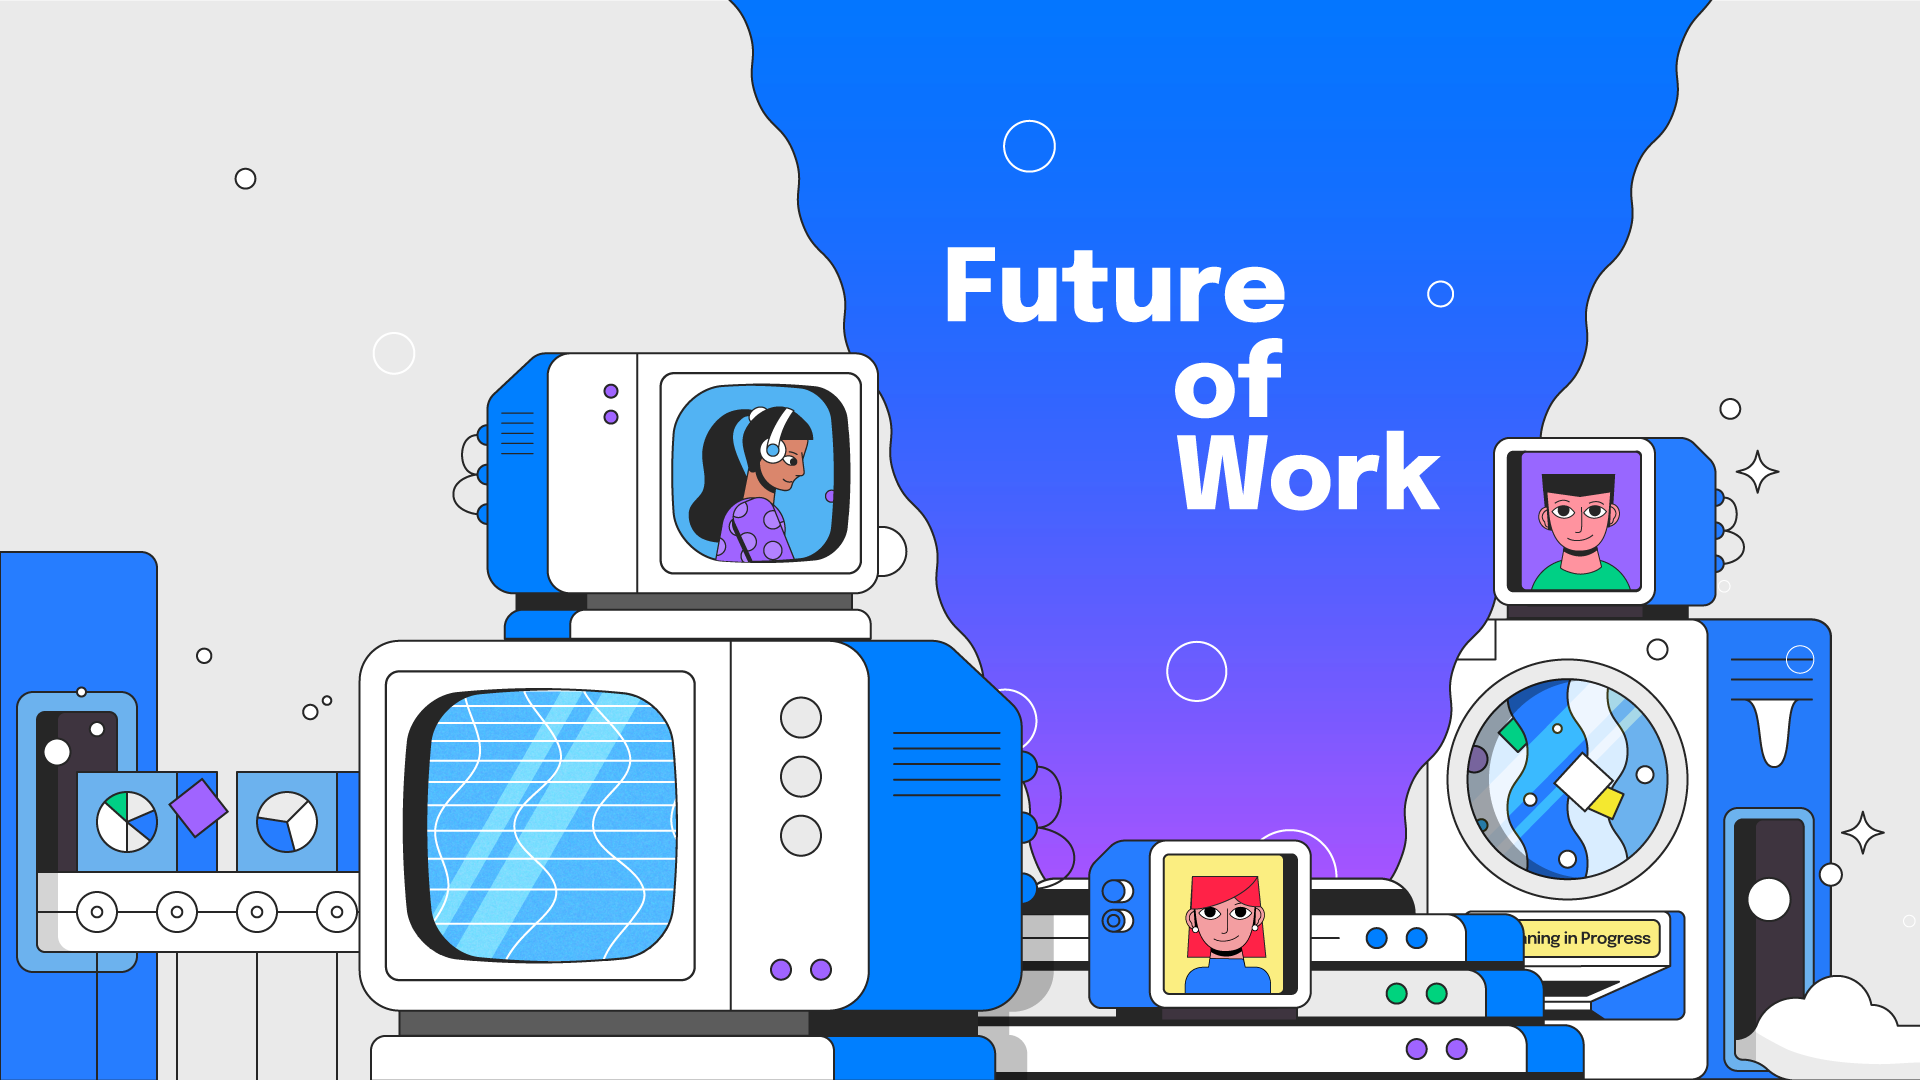 Future of work graphic showing multiple futuristic devices depicting people collaboration virtually and remotely